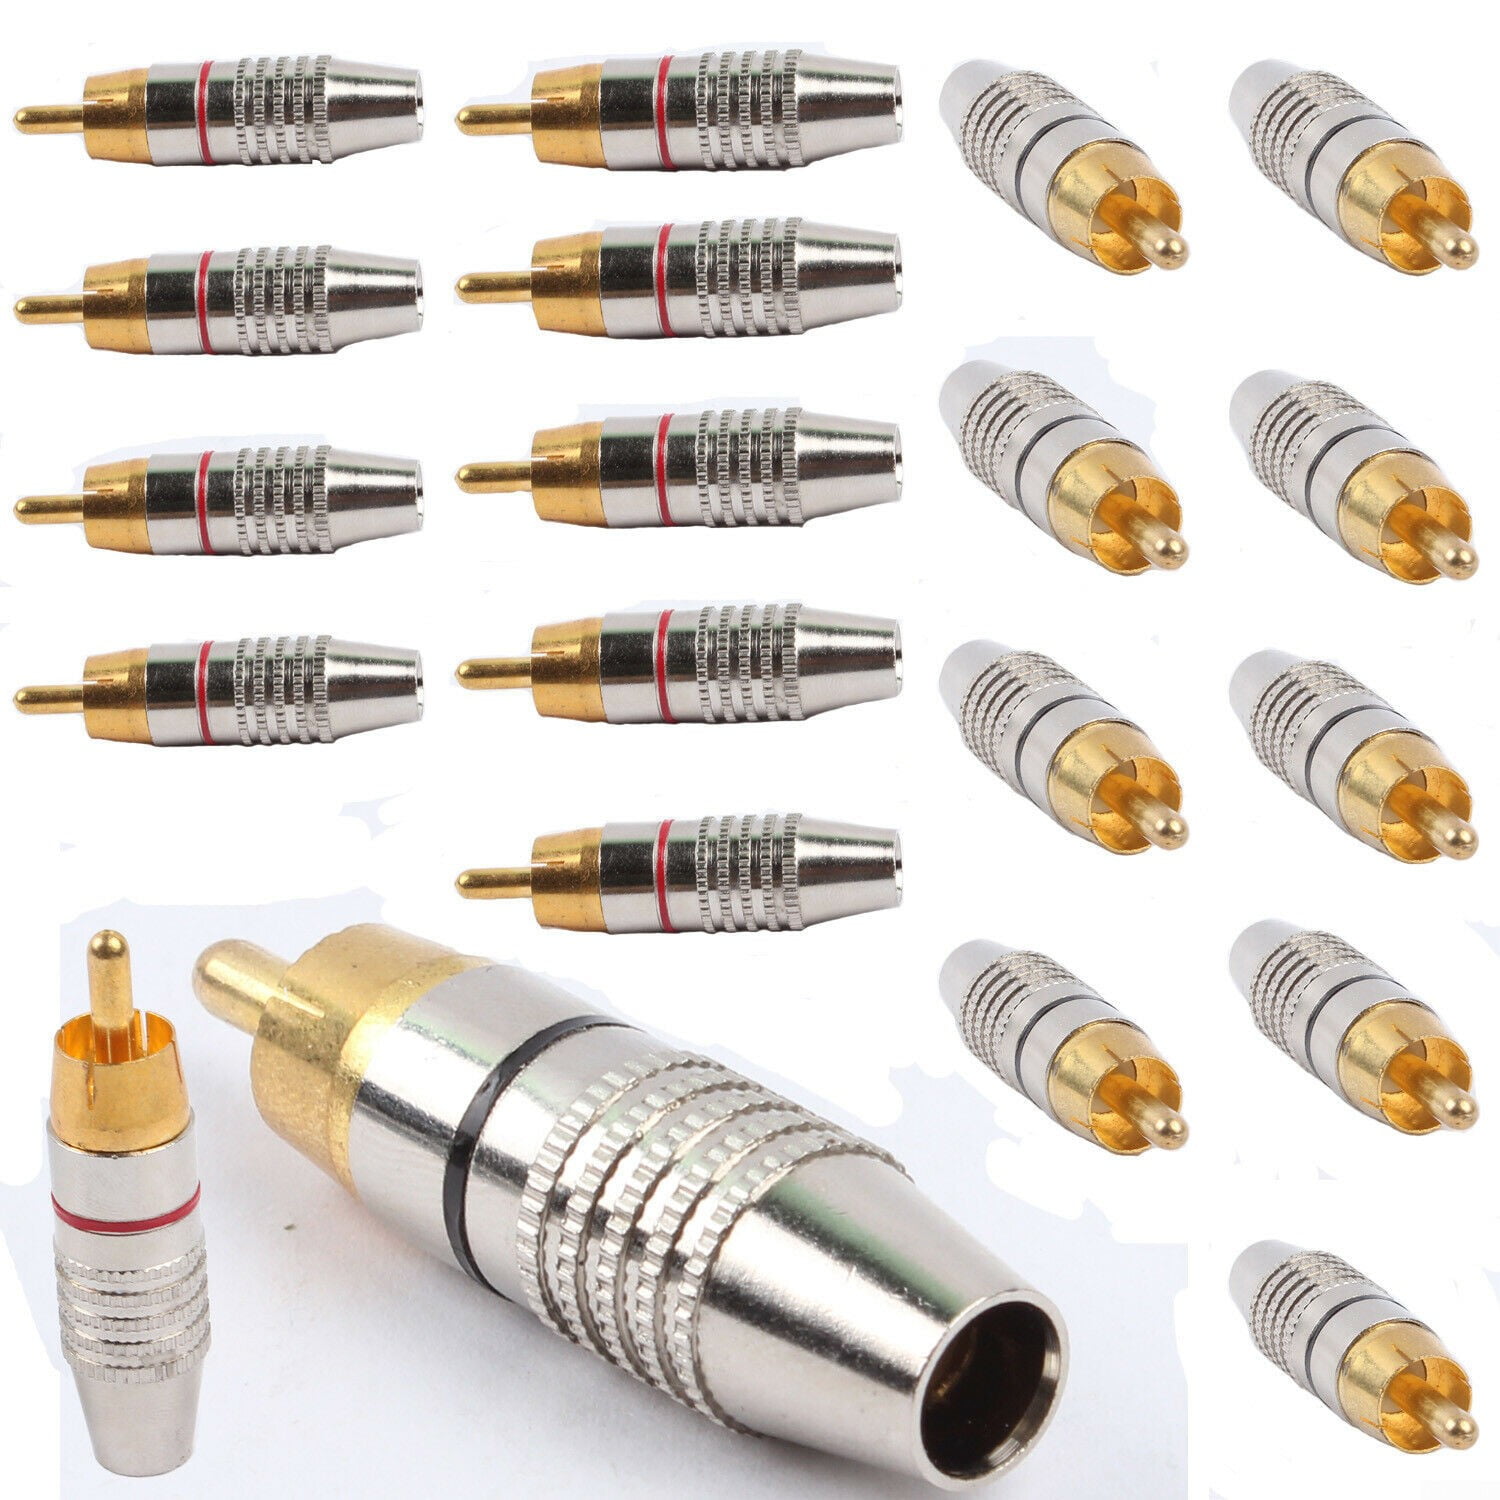 Hot HU11 RCA Male Plug Solder Free Gold Audio Video Adapter Connector Wholesale